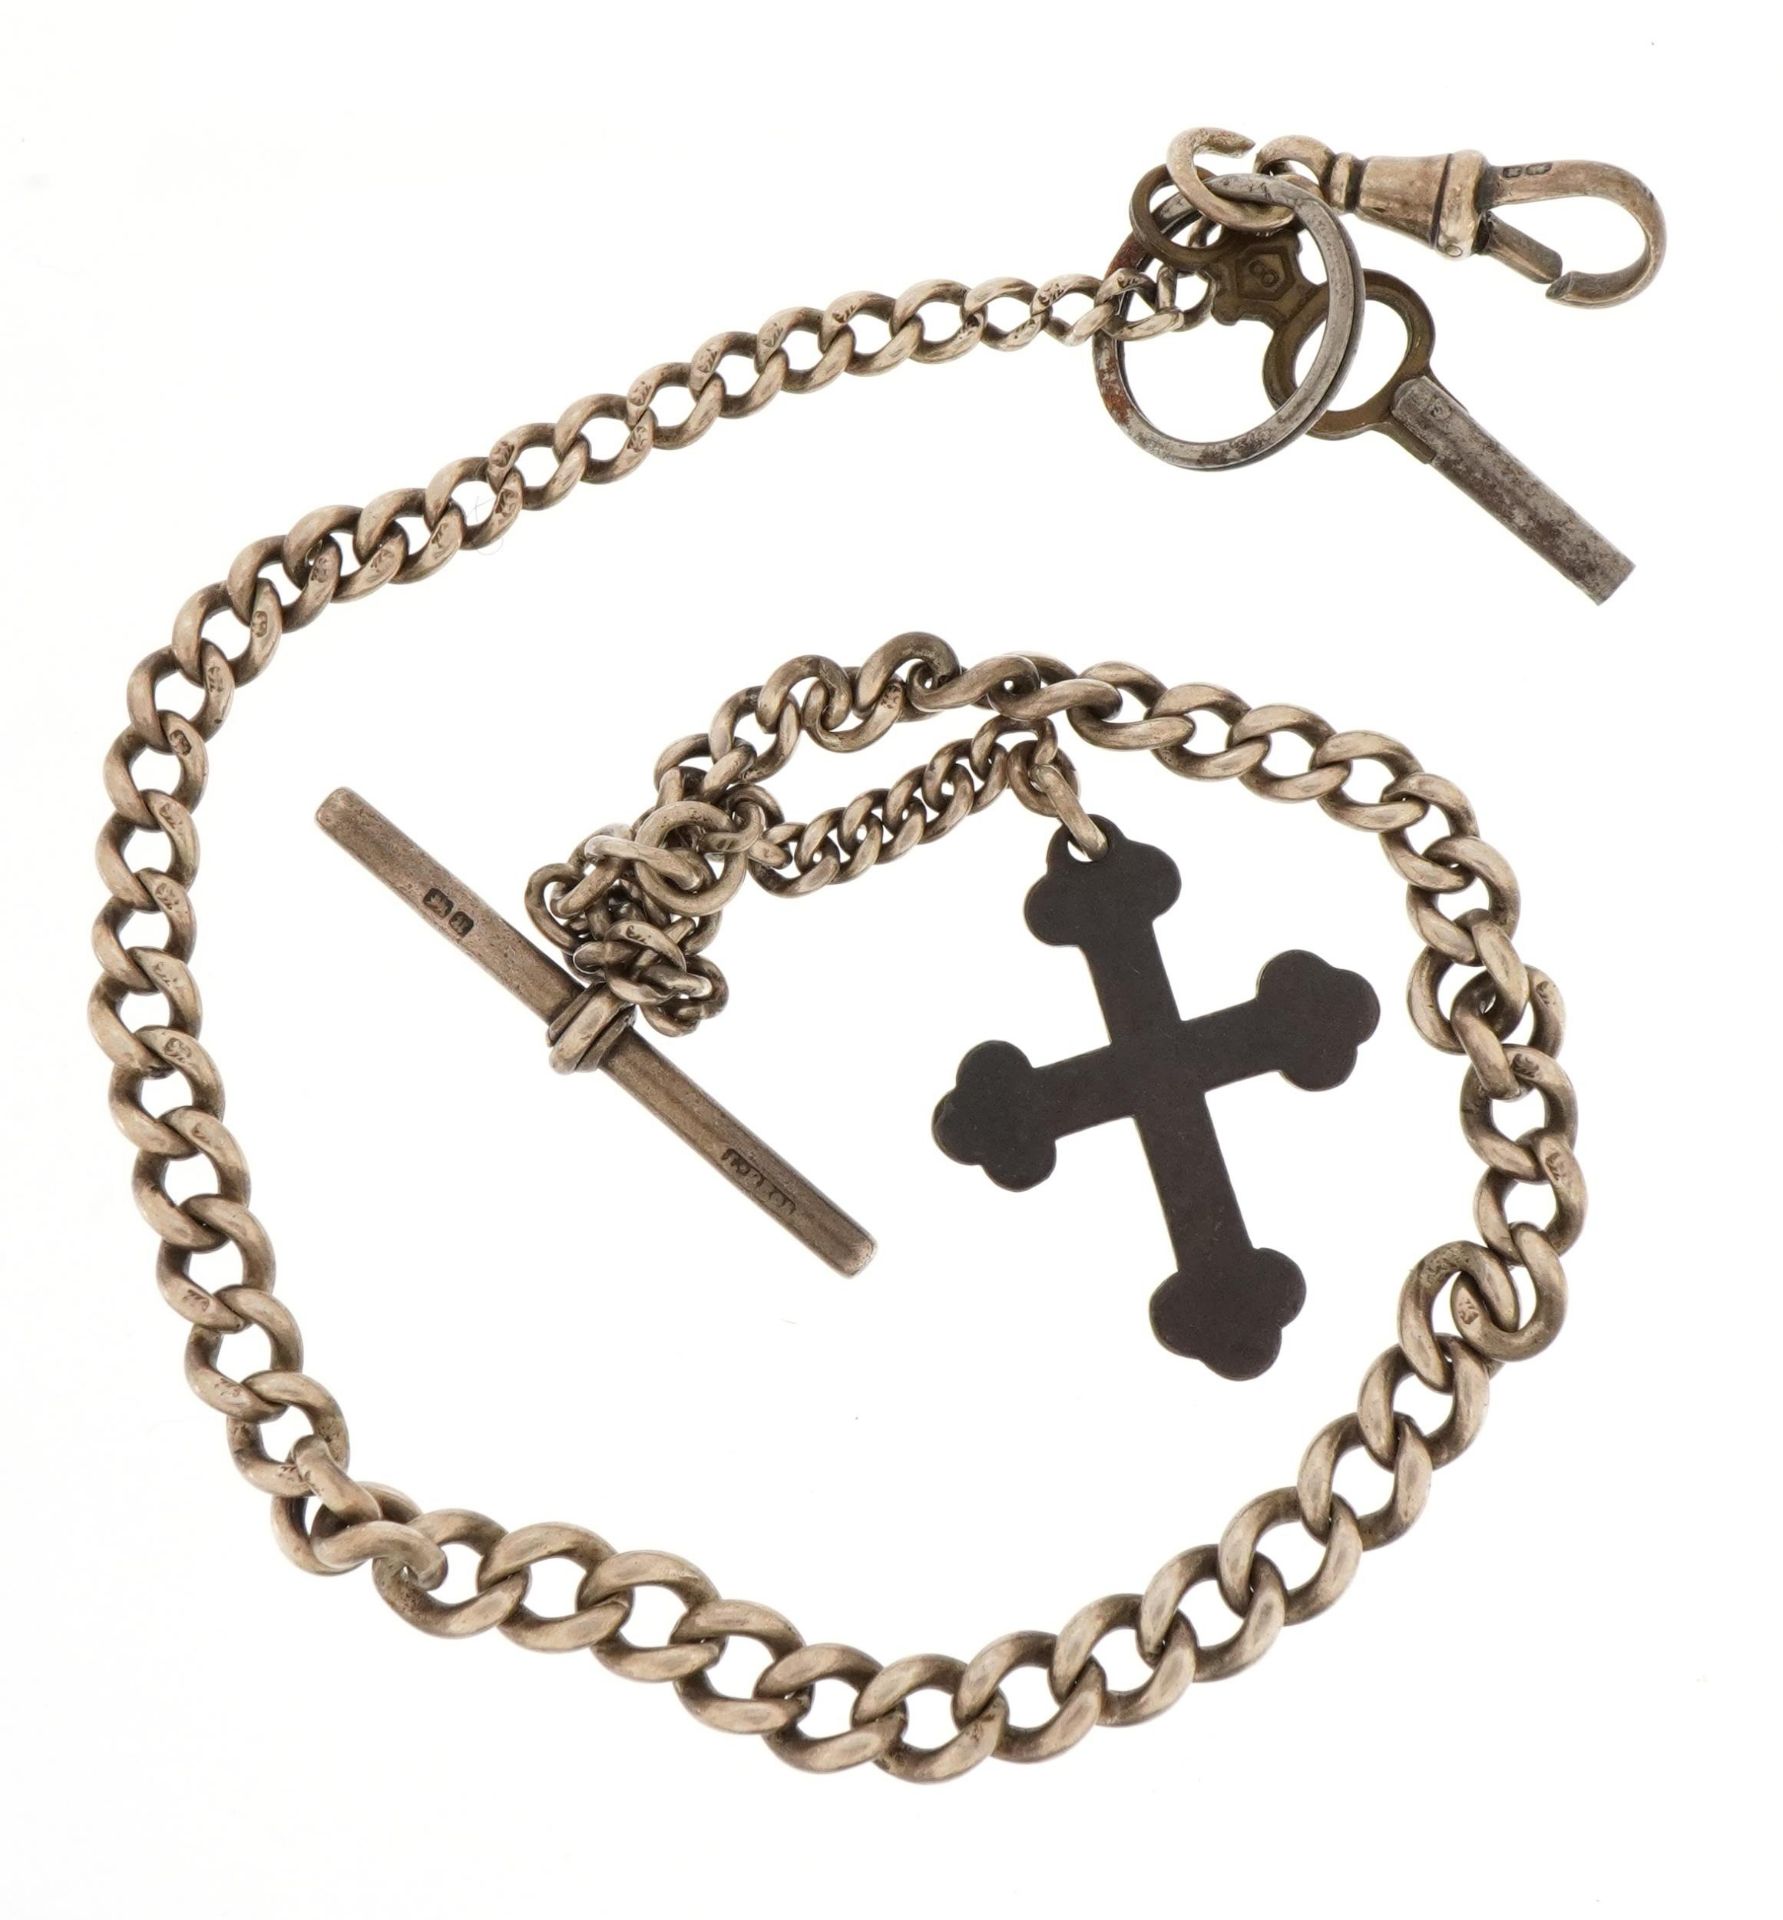 Silver watch chain Birmingham 1919, with each link stamped, with metal watch key and crucifix, - Image 3 of 4